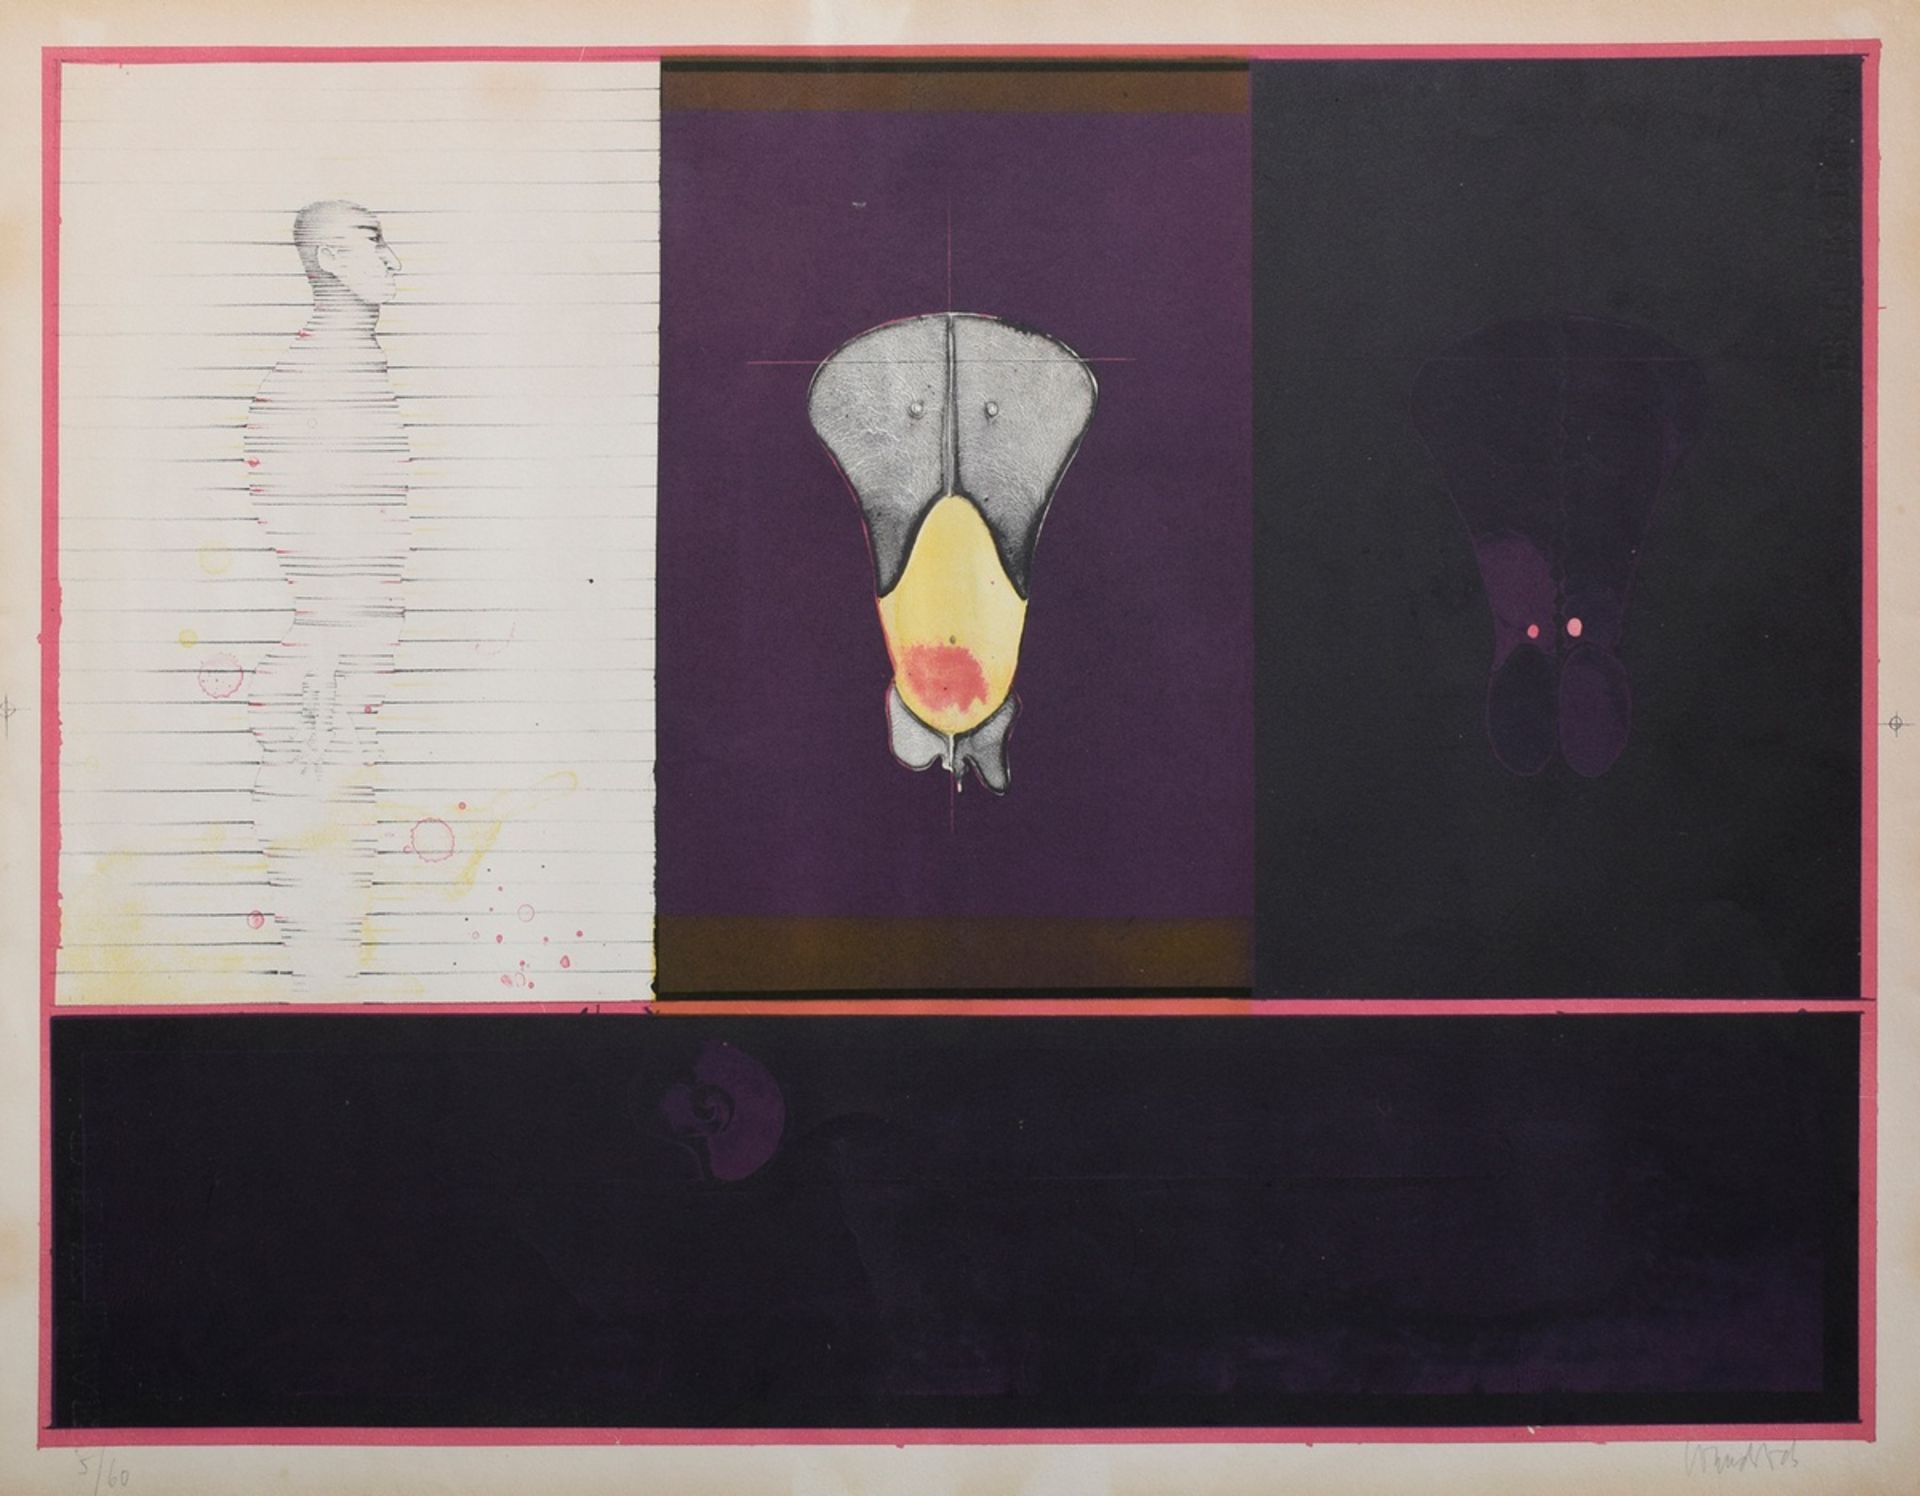 Wunderlich, Paul (1927-2010) "Corpus delicti I (homme)" and "Corpus delicti II (femme)" 1966, colou - Image 4 of 4